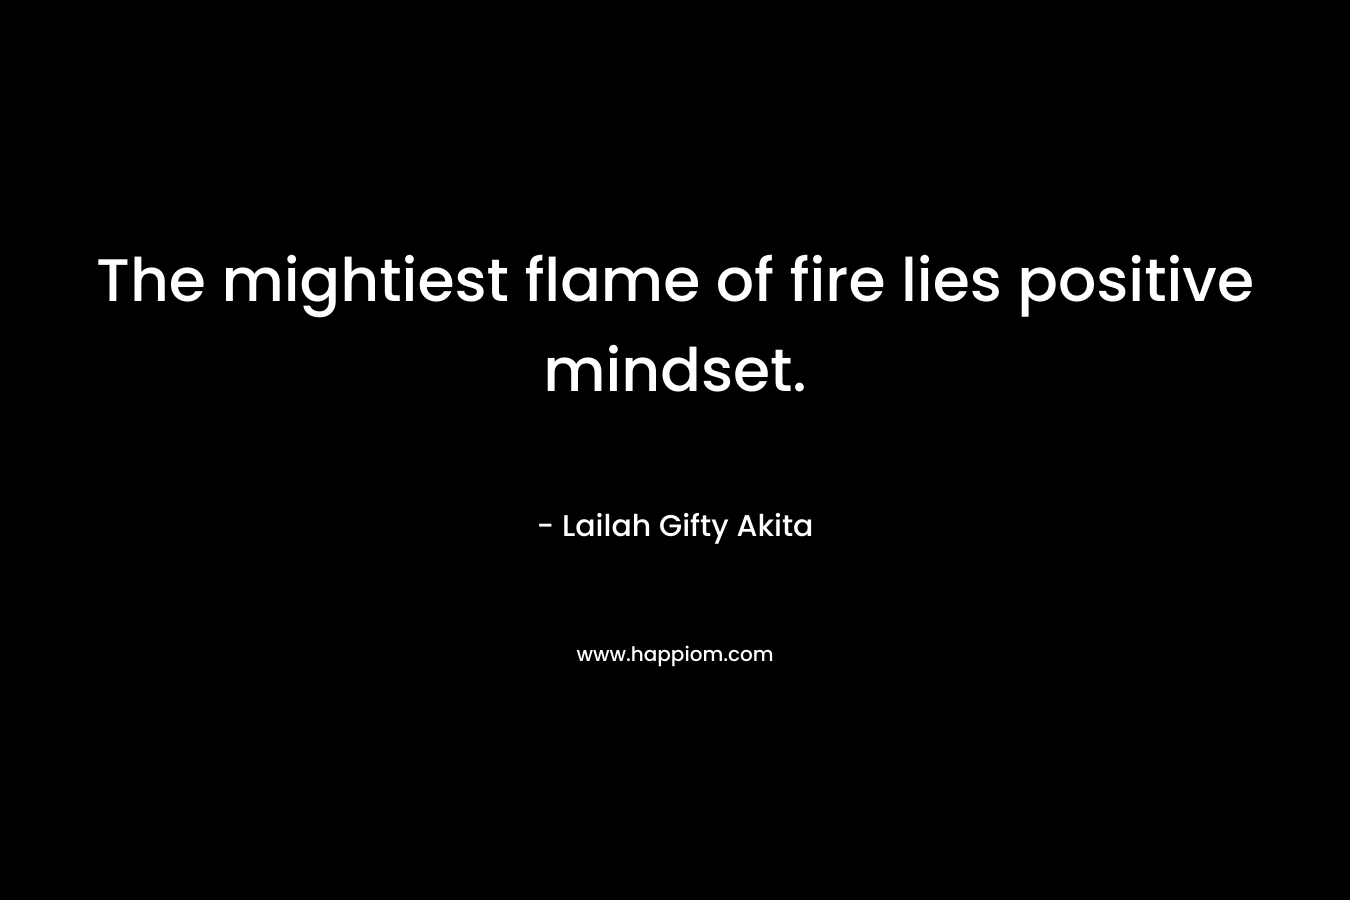 The mightiest flame of fire lies positive mindset. – Lailah Gifty Akita